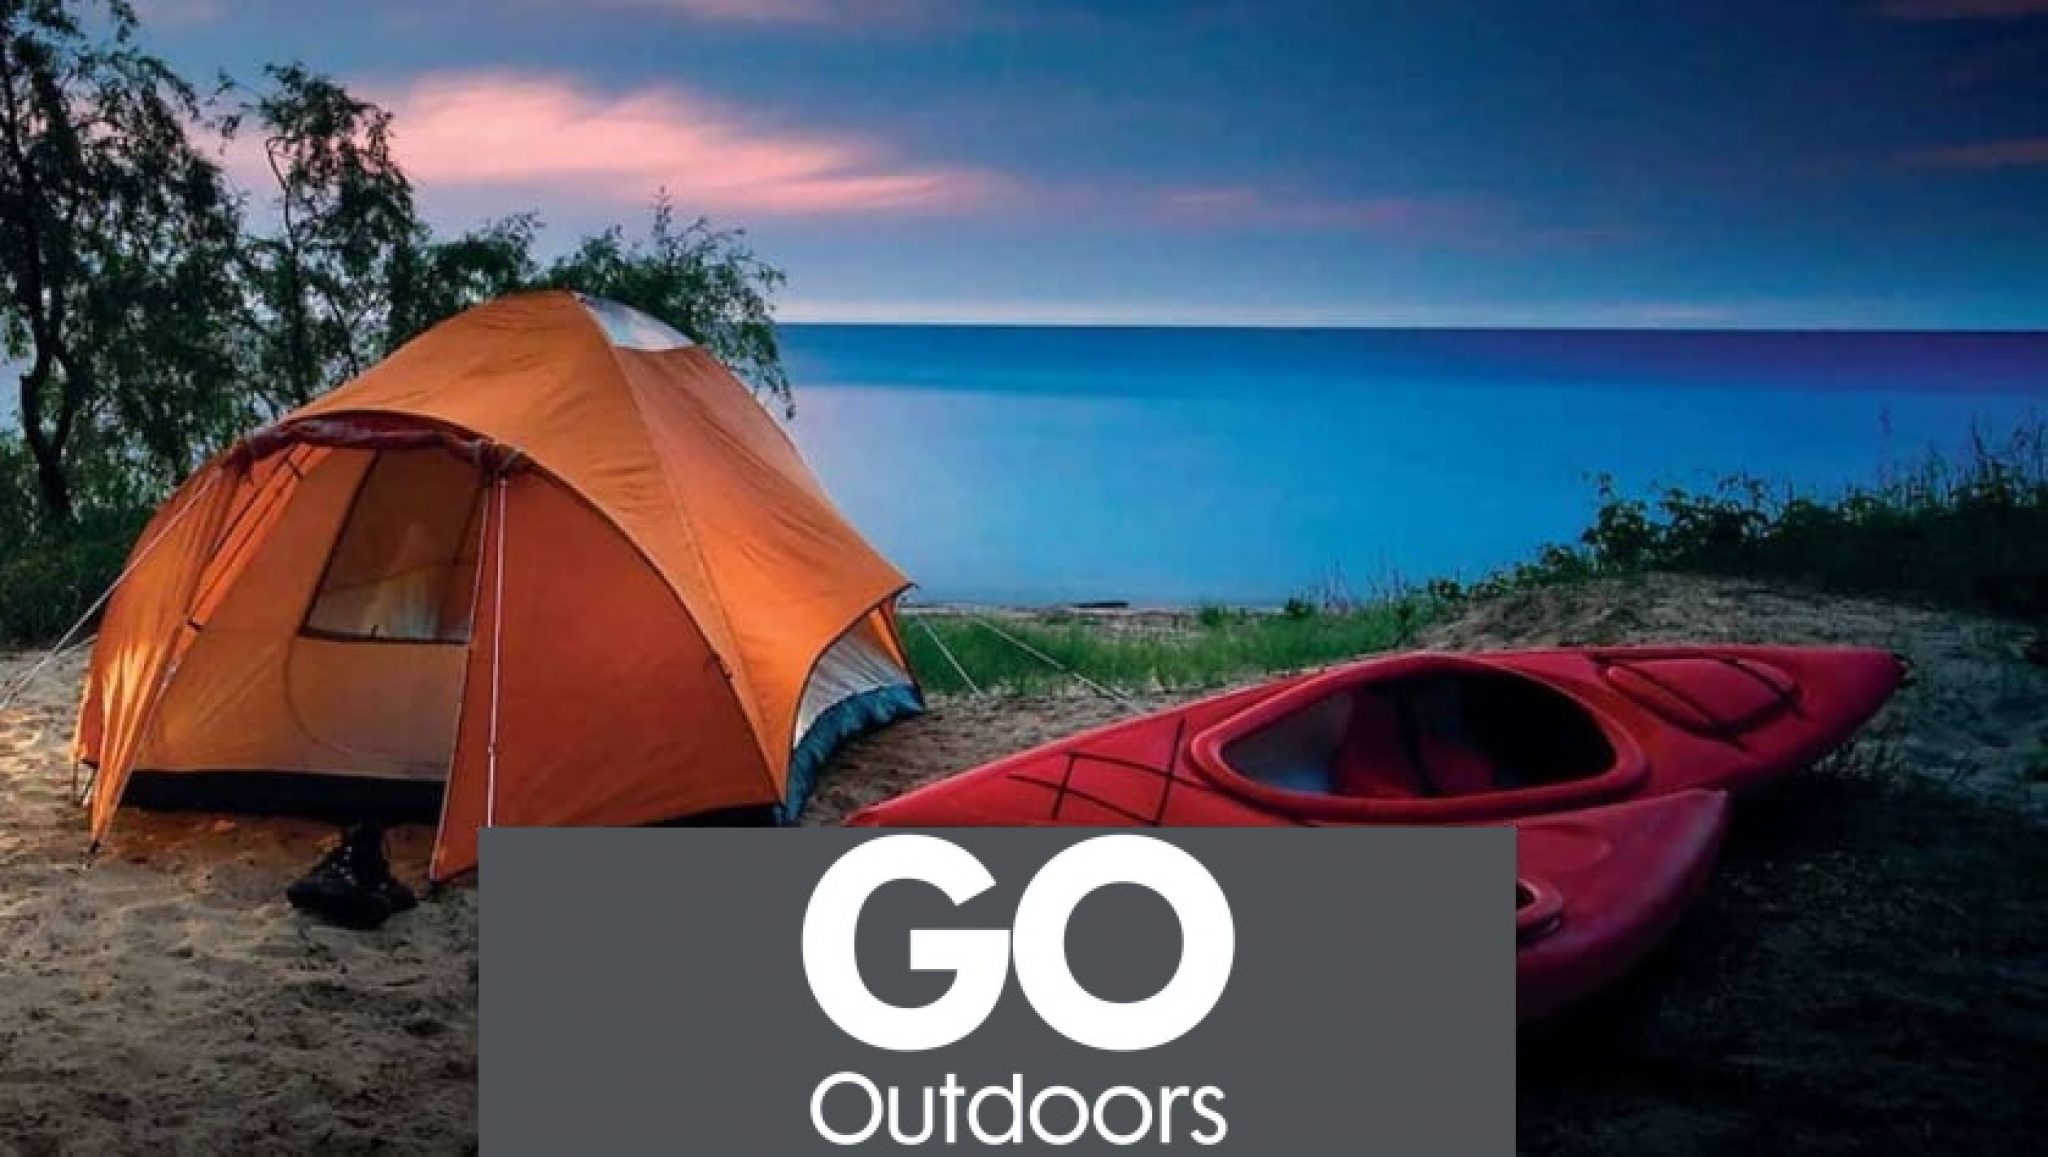 Go Outdoors Find your latest NHS Bargain?